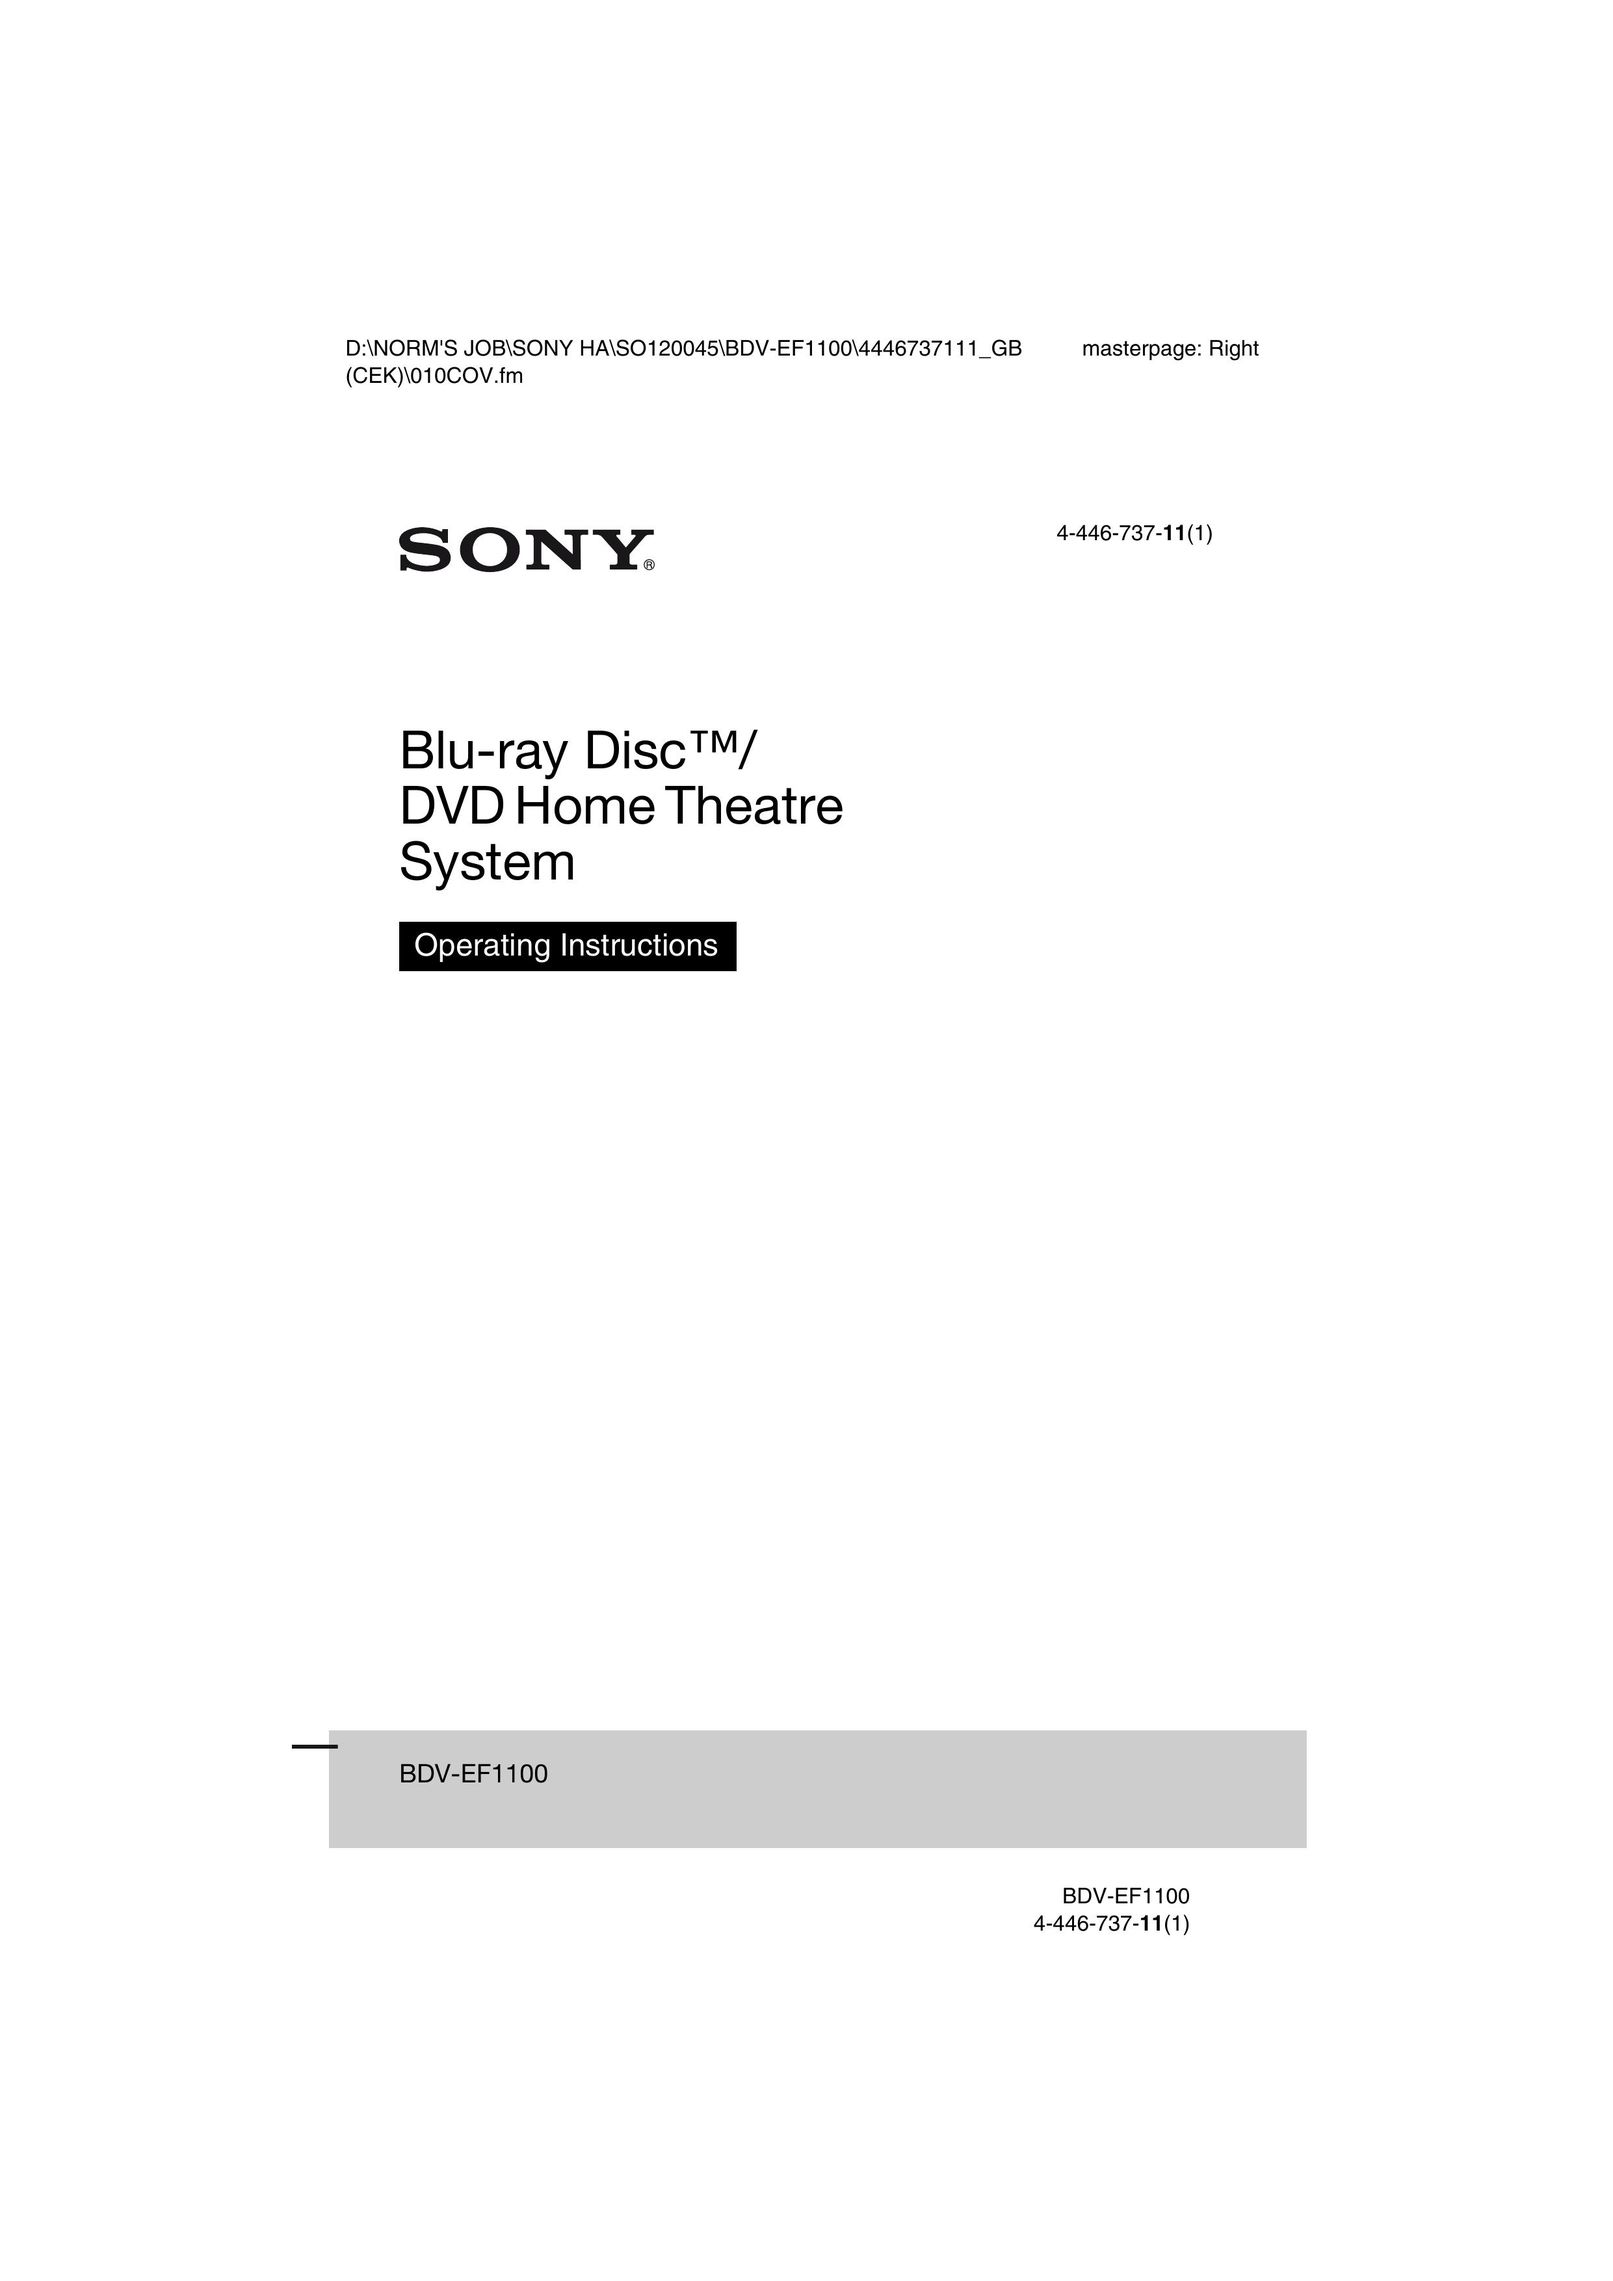 Sony BDV-EF1100 Home Theater System User Manual